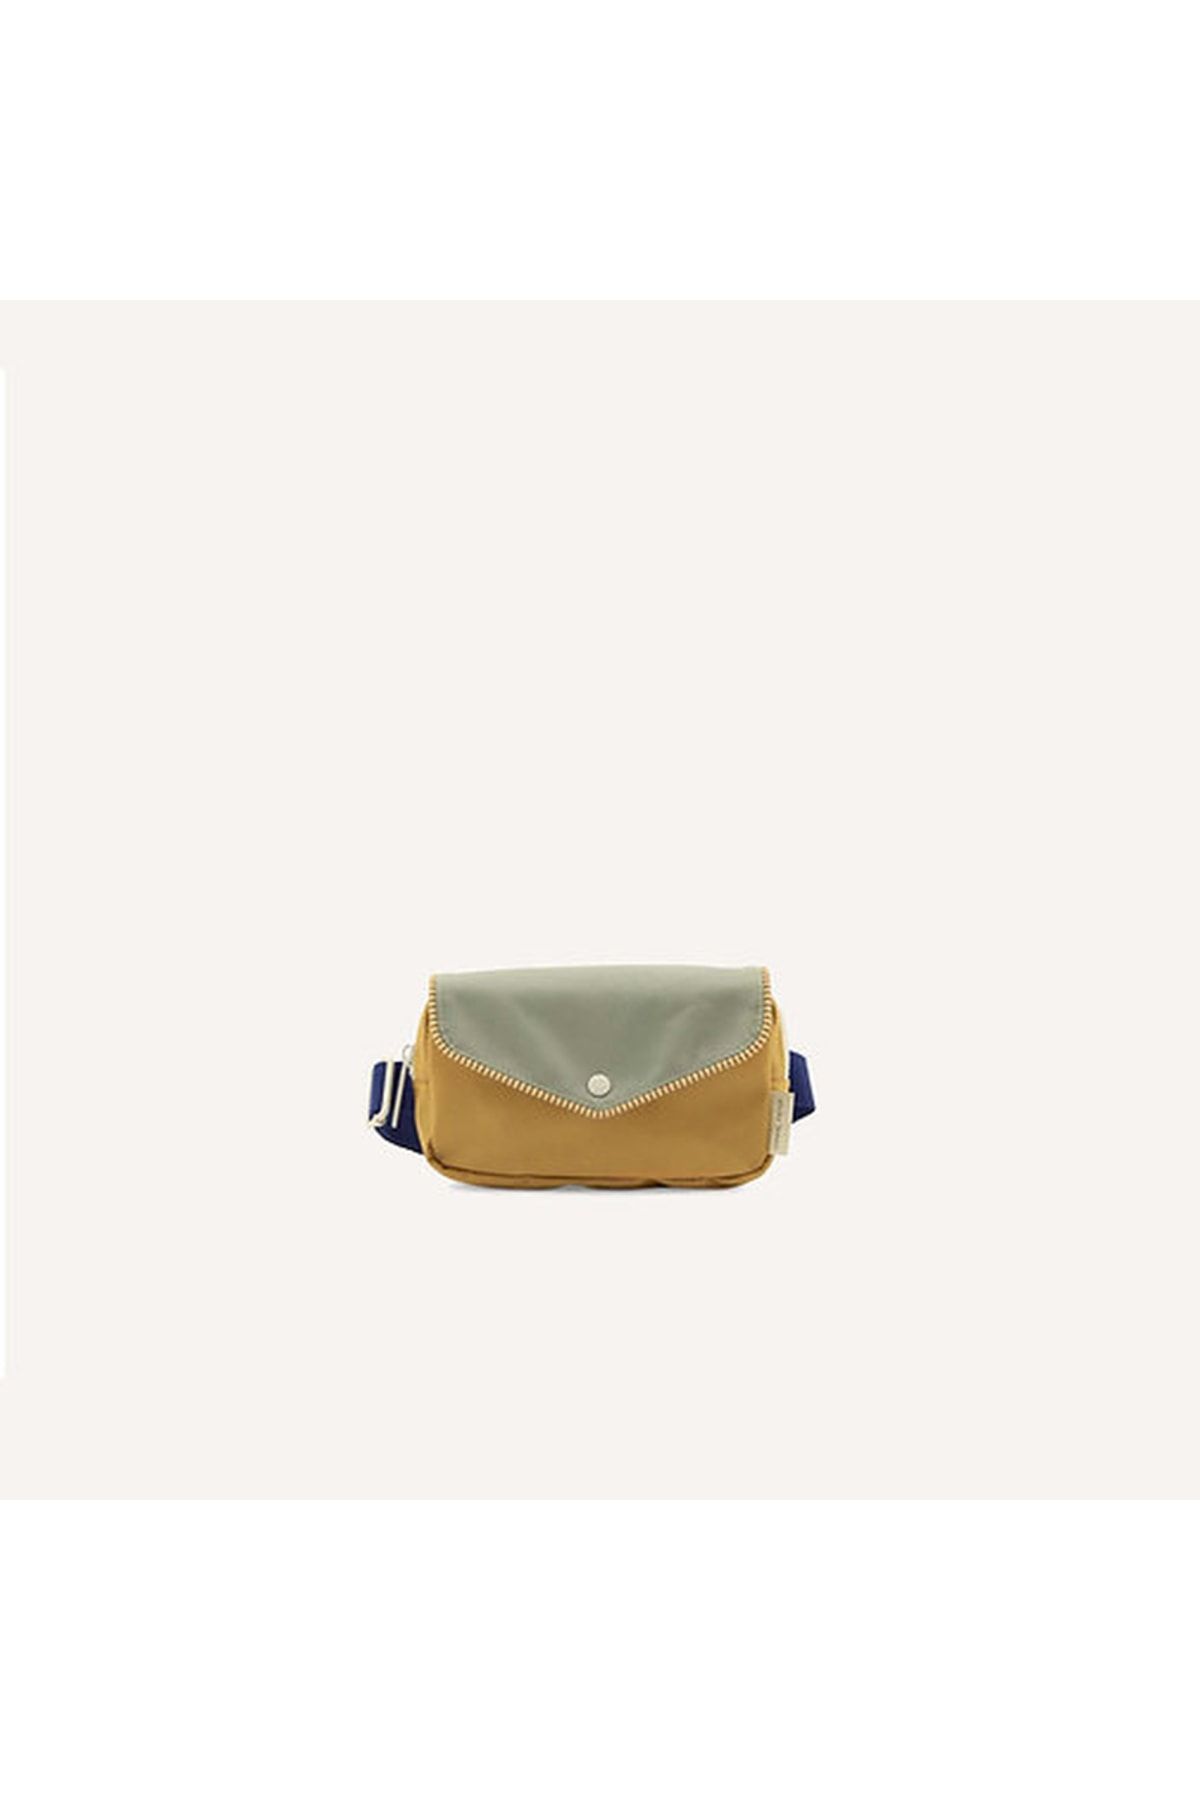 Sticky Lemon Fanny Pack | Envelope Collection | Meet Me In The Meadows